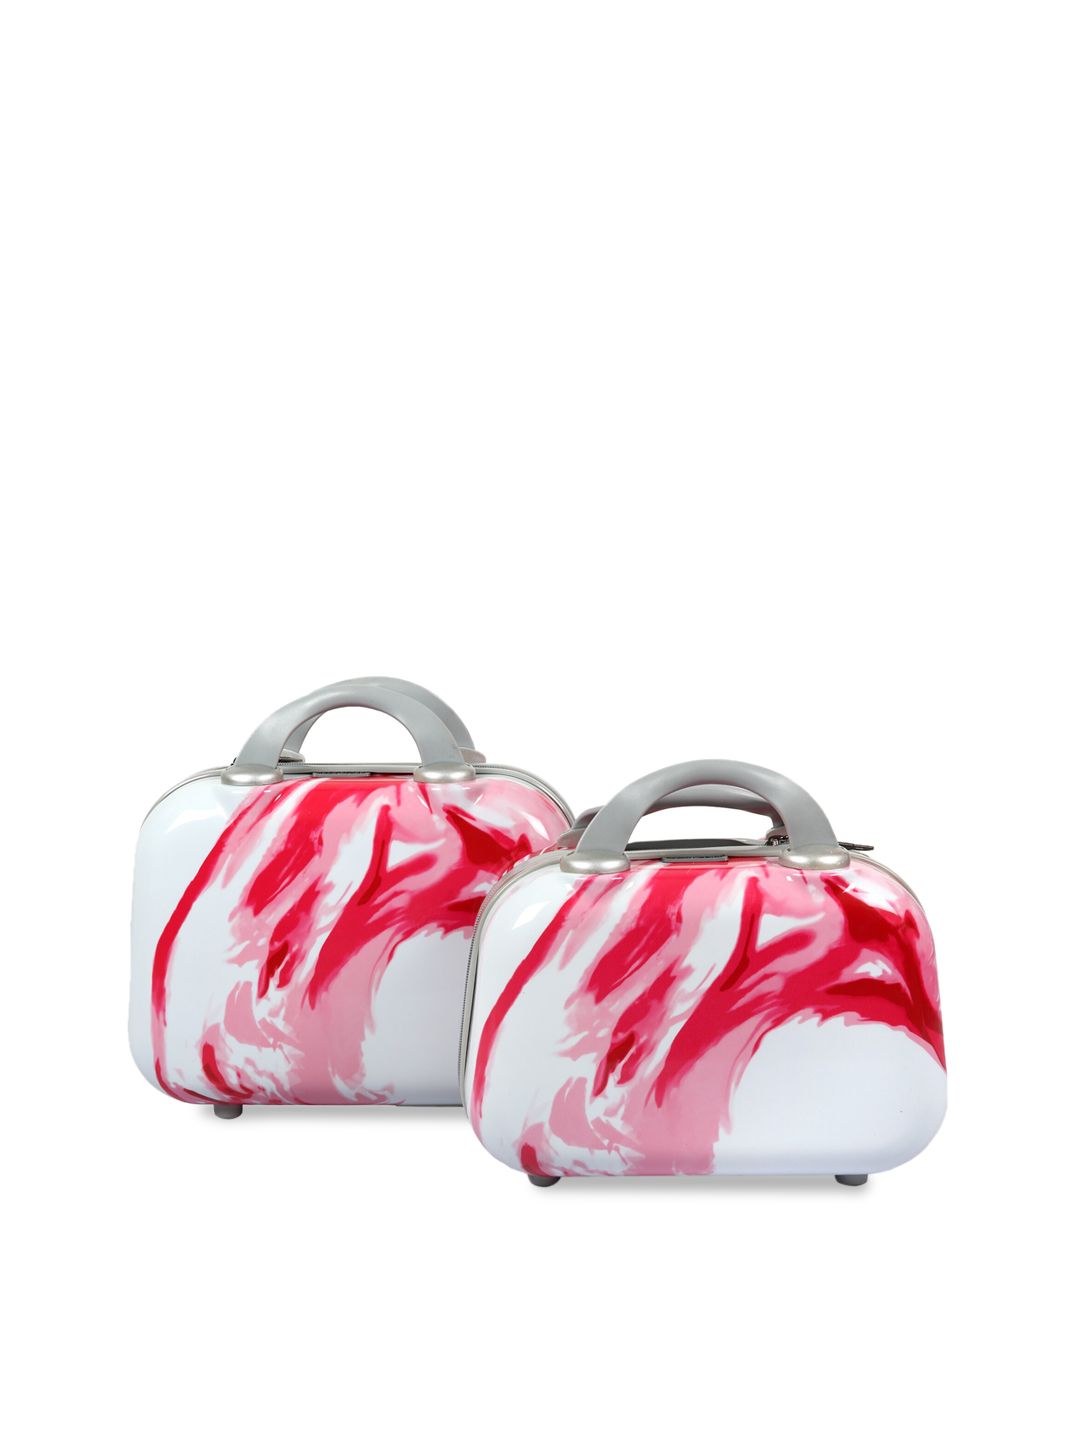 Polo Class Red & White Set of 2 Travel Luggage Vanity Bag 13L Price in India